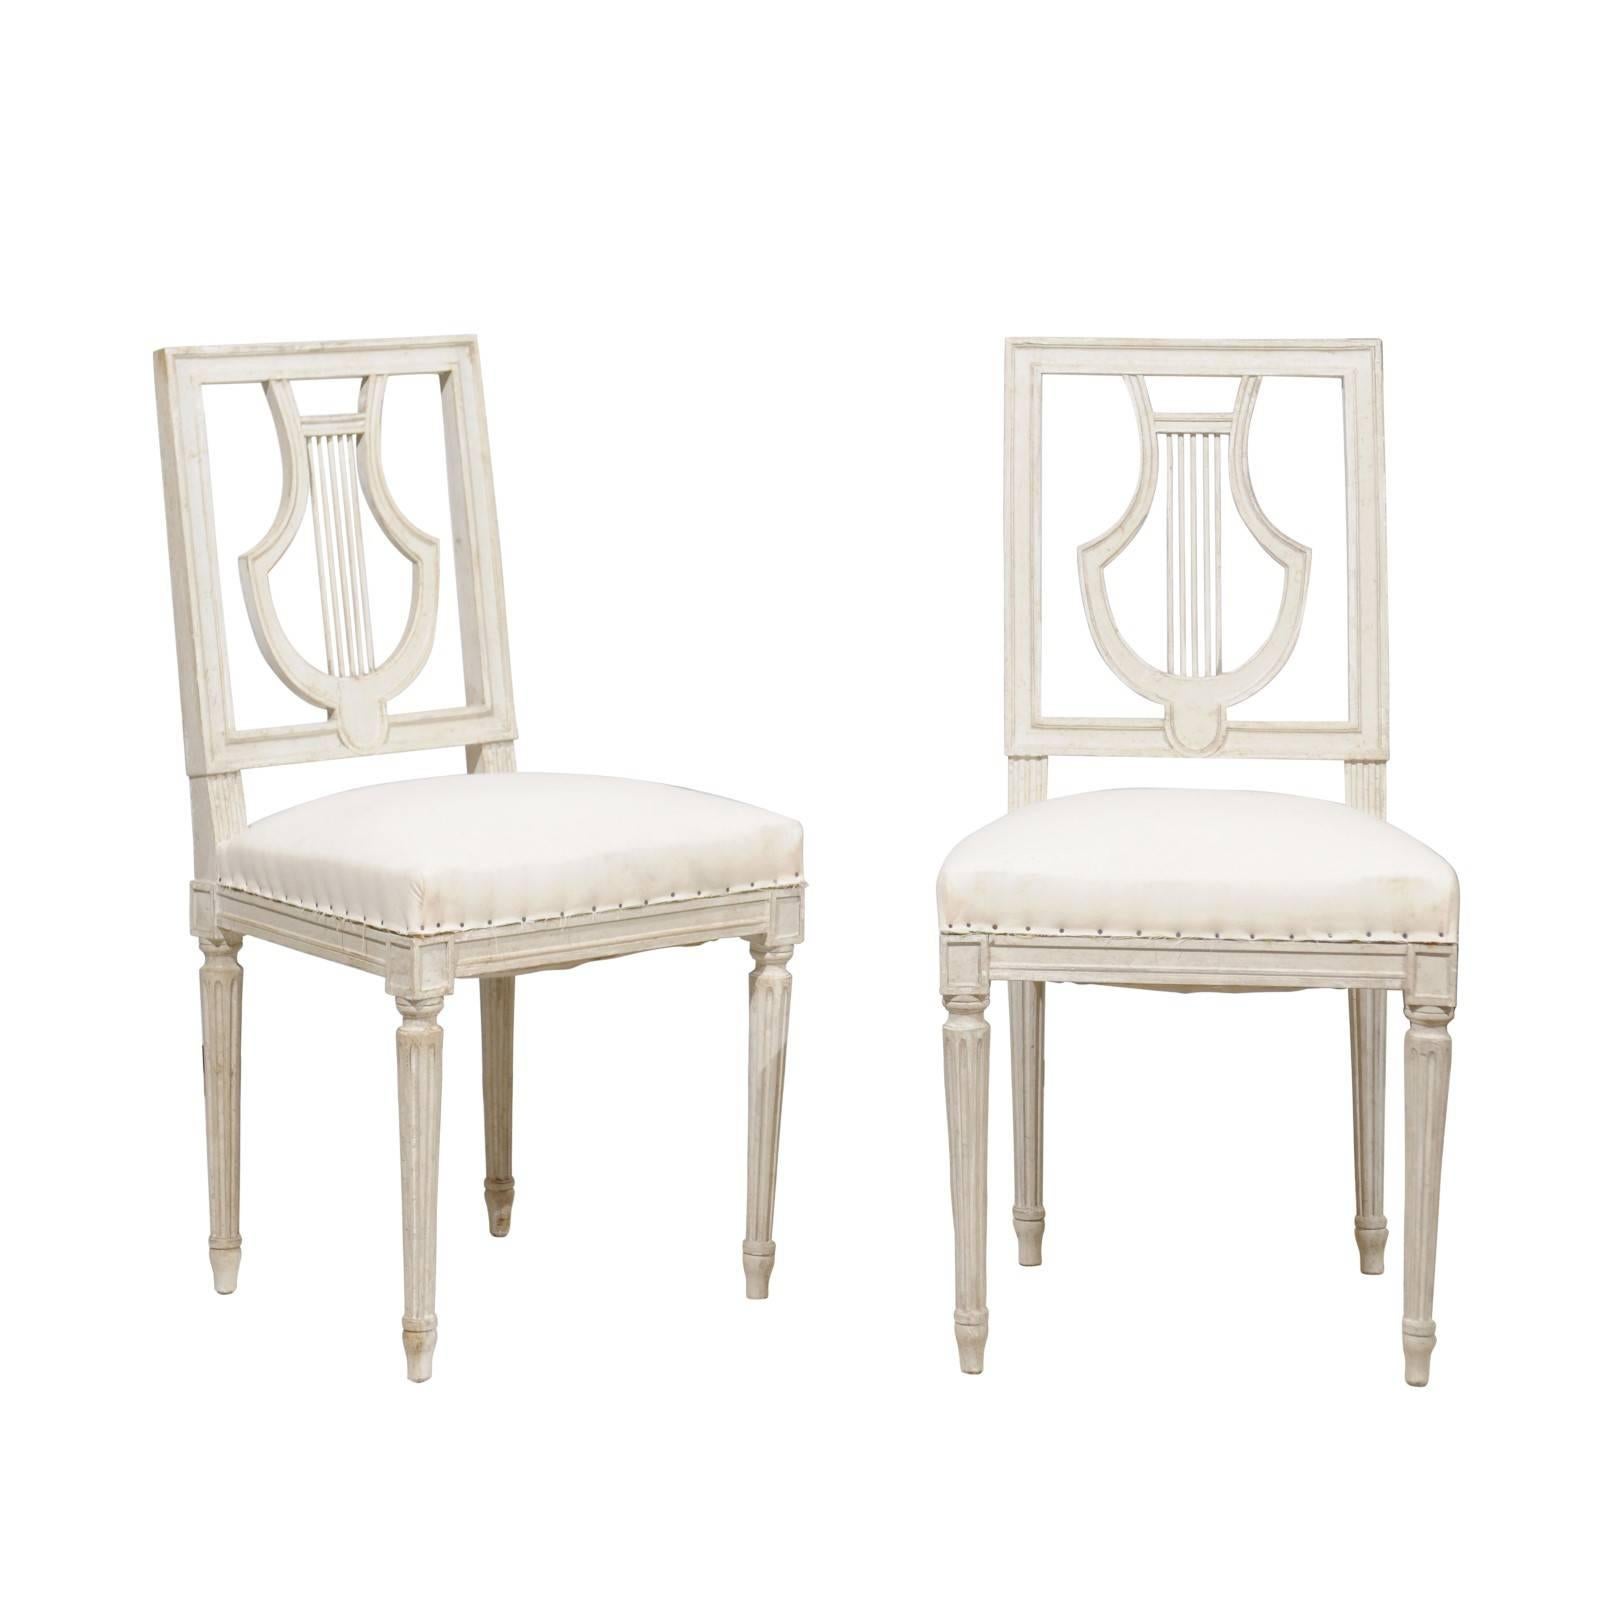 French Pair of Painted Dining Chairs with Lyre-Shaped Backs, Early 20th Century